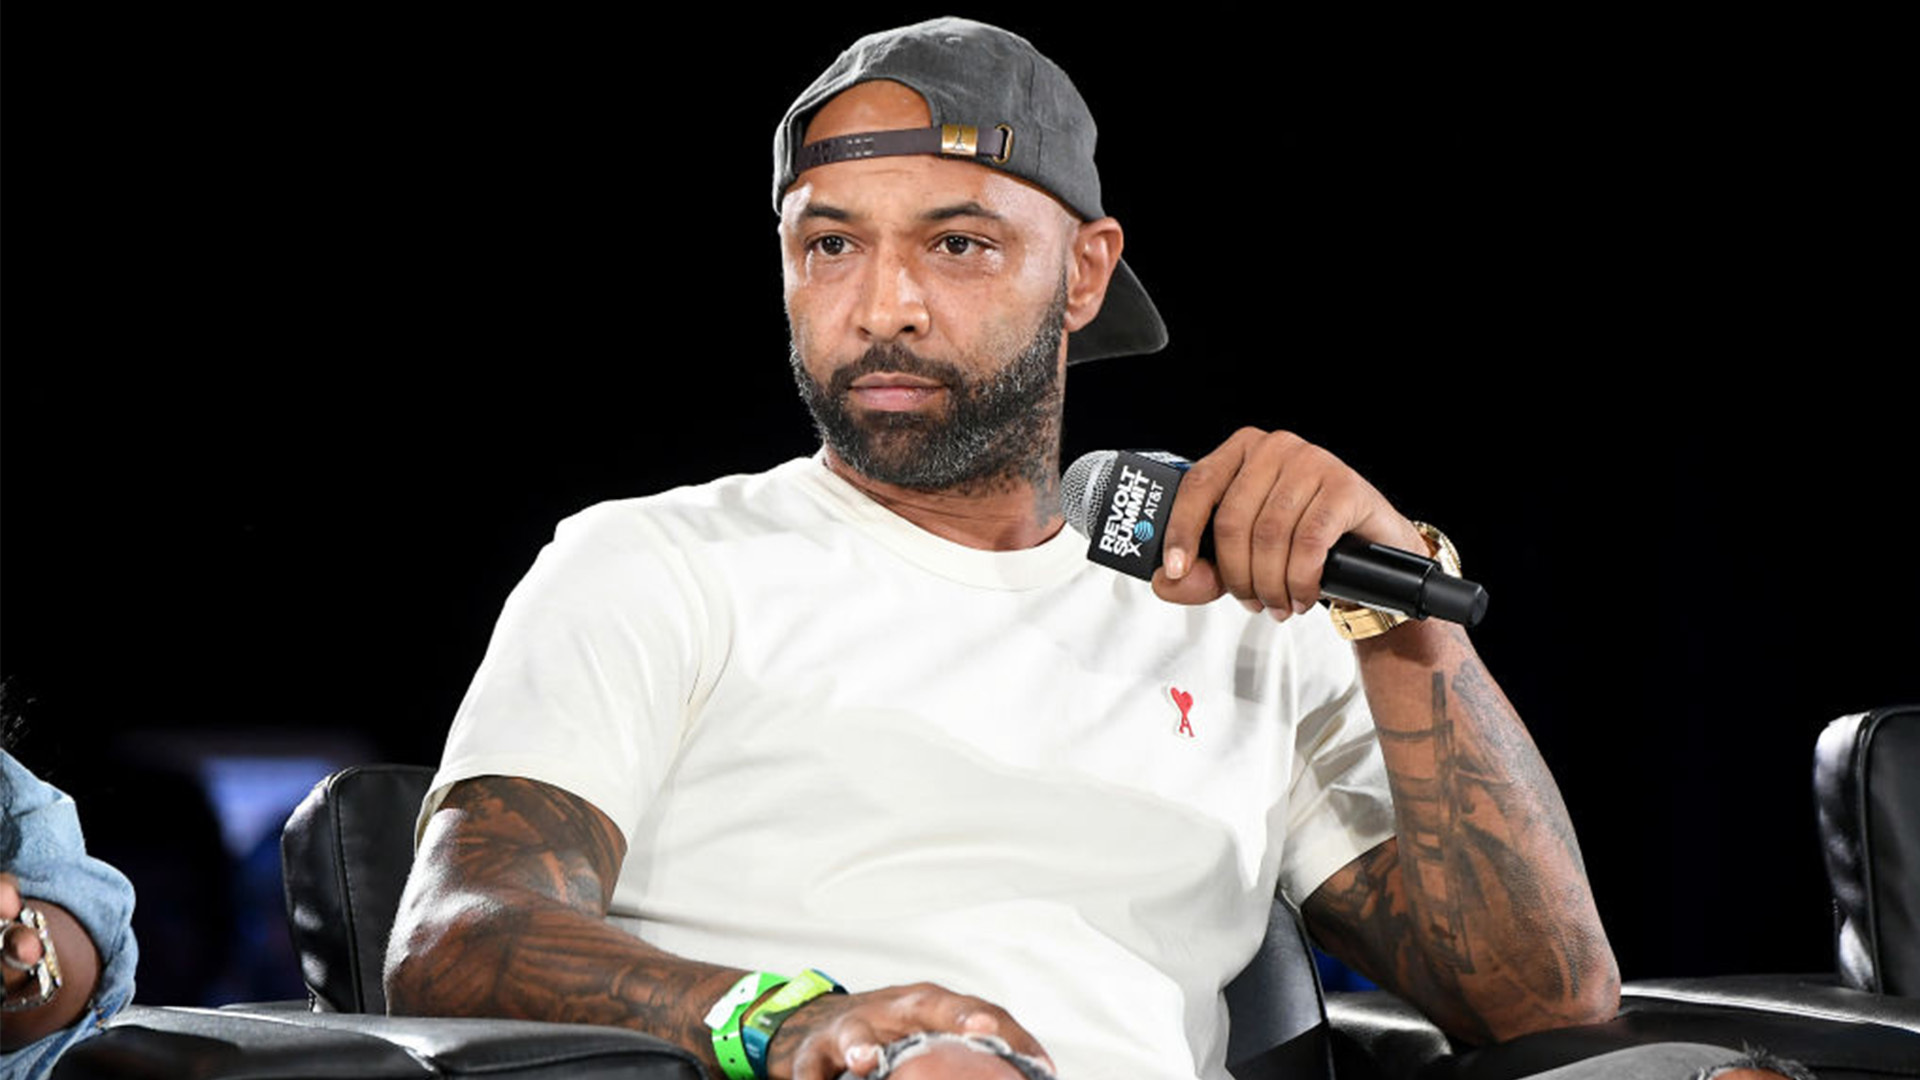 Joe Budden Says He's Made About $4M From His Success In Podcasting And Offers Advice To The Industry — 'This Is Not Unimaginable If You Work Hard'